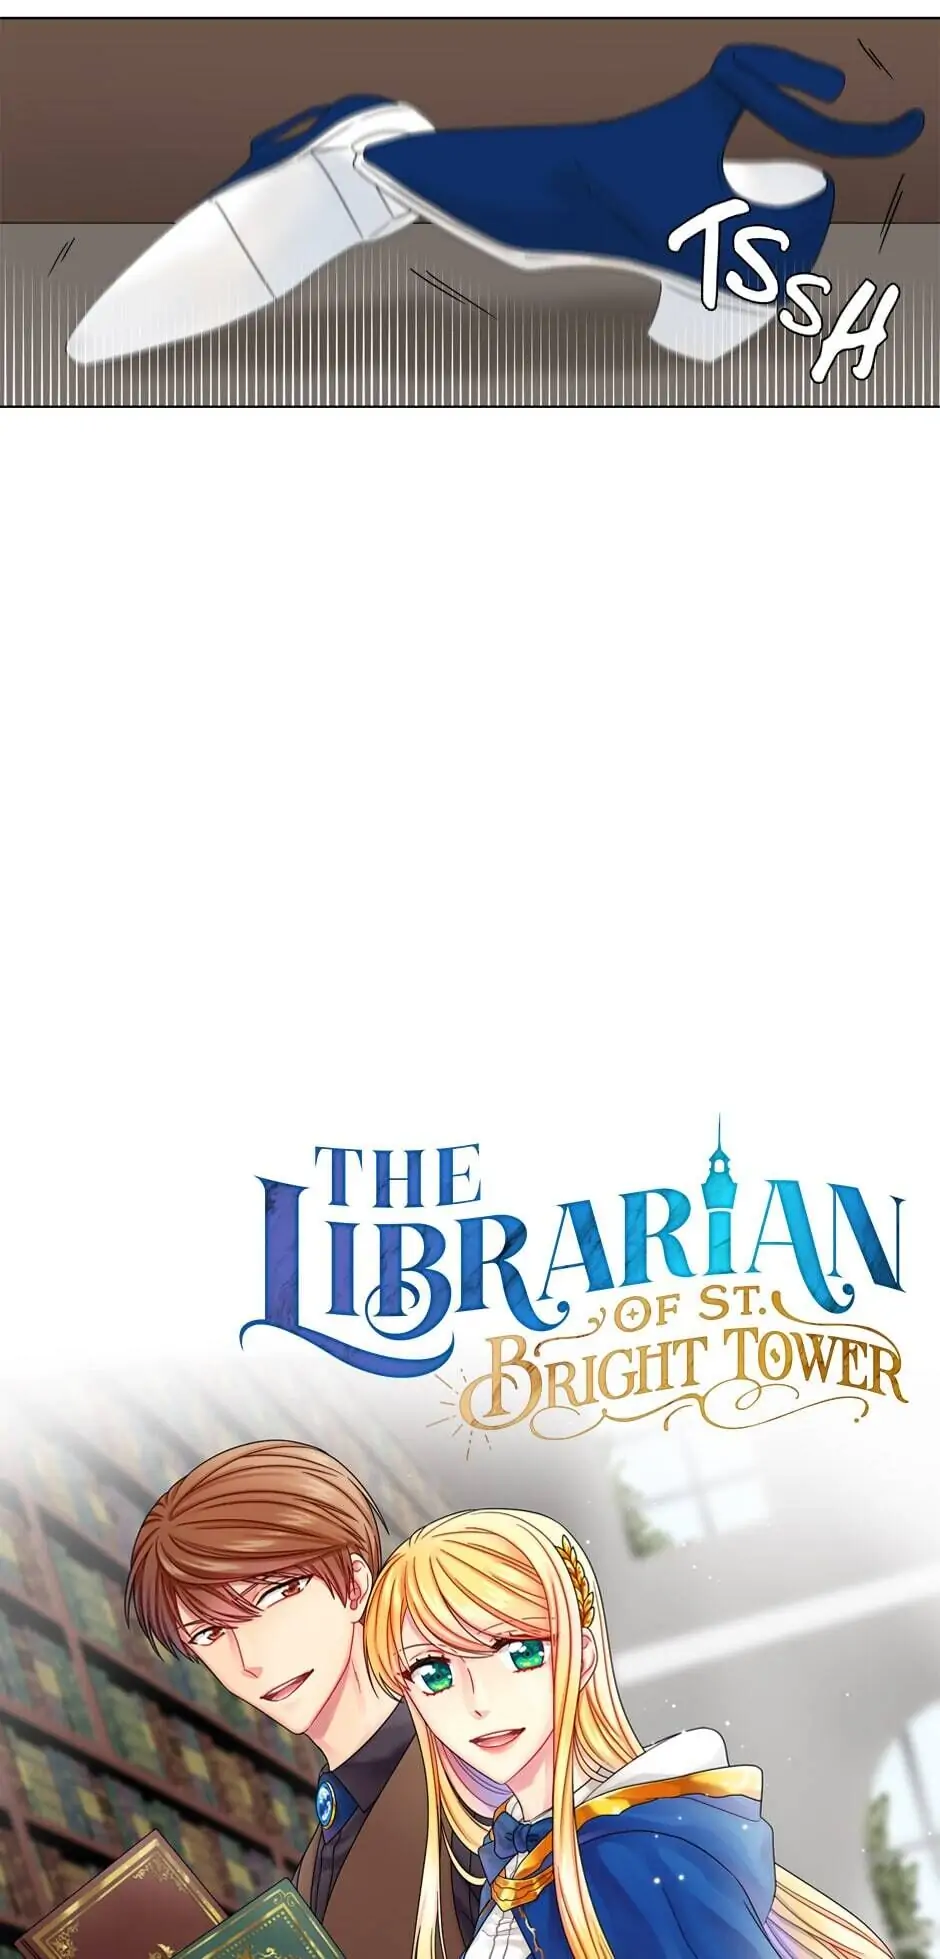 The Magic Tower Librarian chapter 10